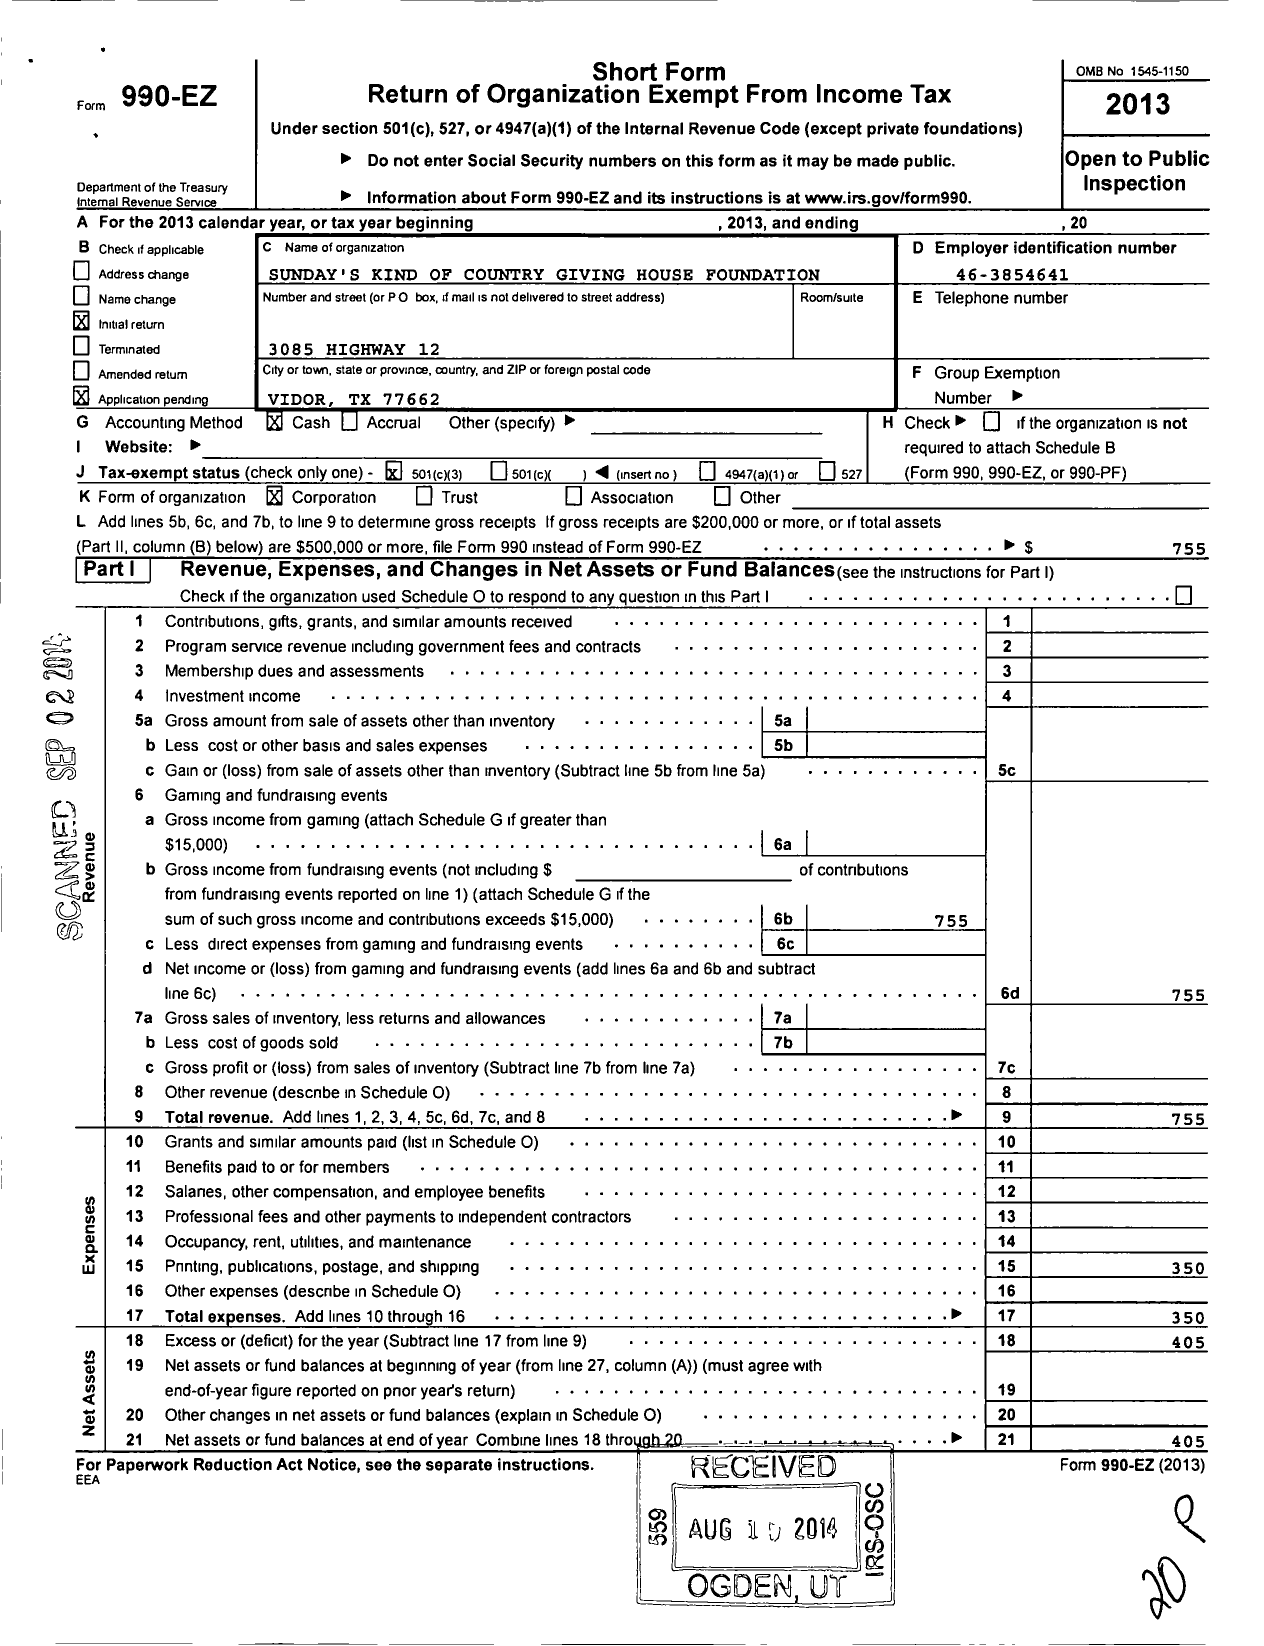 Image of first page of 2013 Form 990EZ for Sundays Kind of Country Giving House Foundation